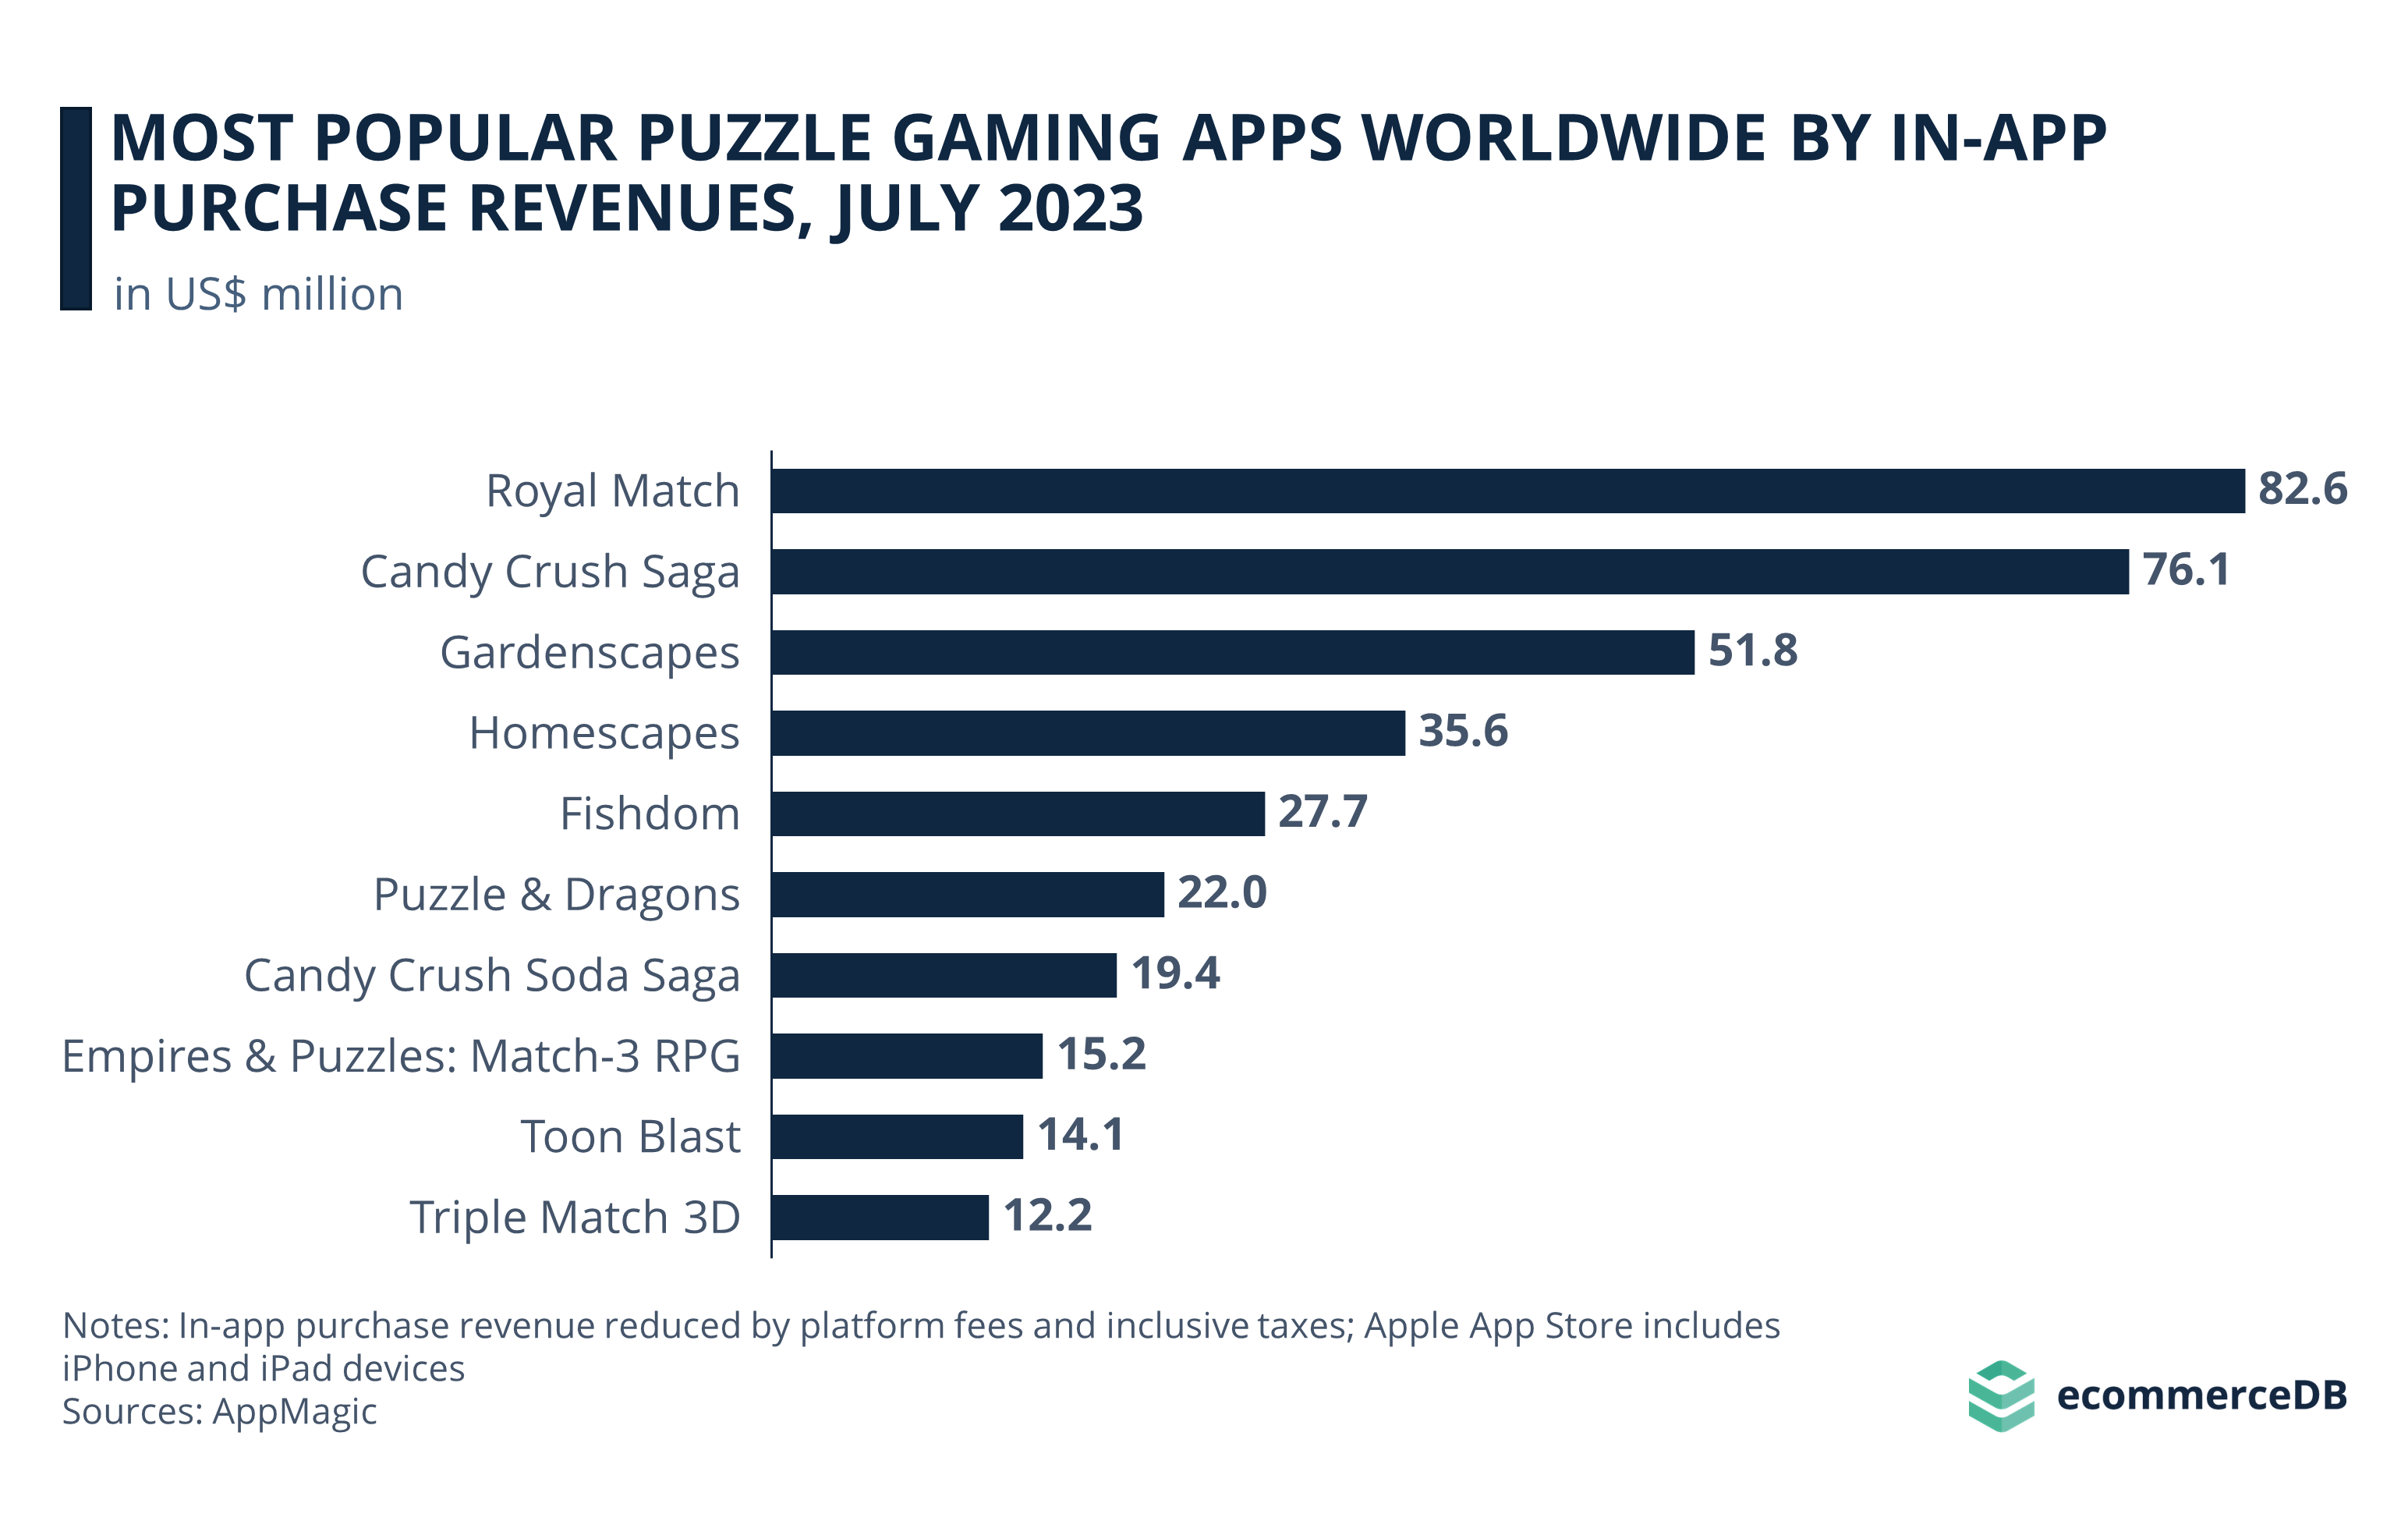 Most Popular Puzzle Gaming Apps Workwide by In-App Purchase Revenues, July 2023